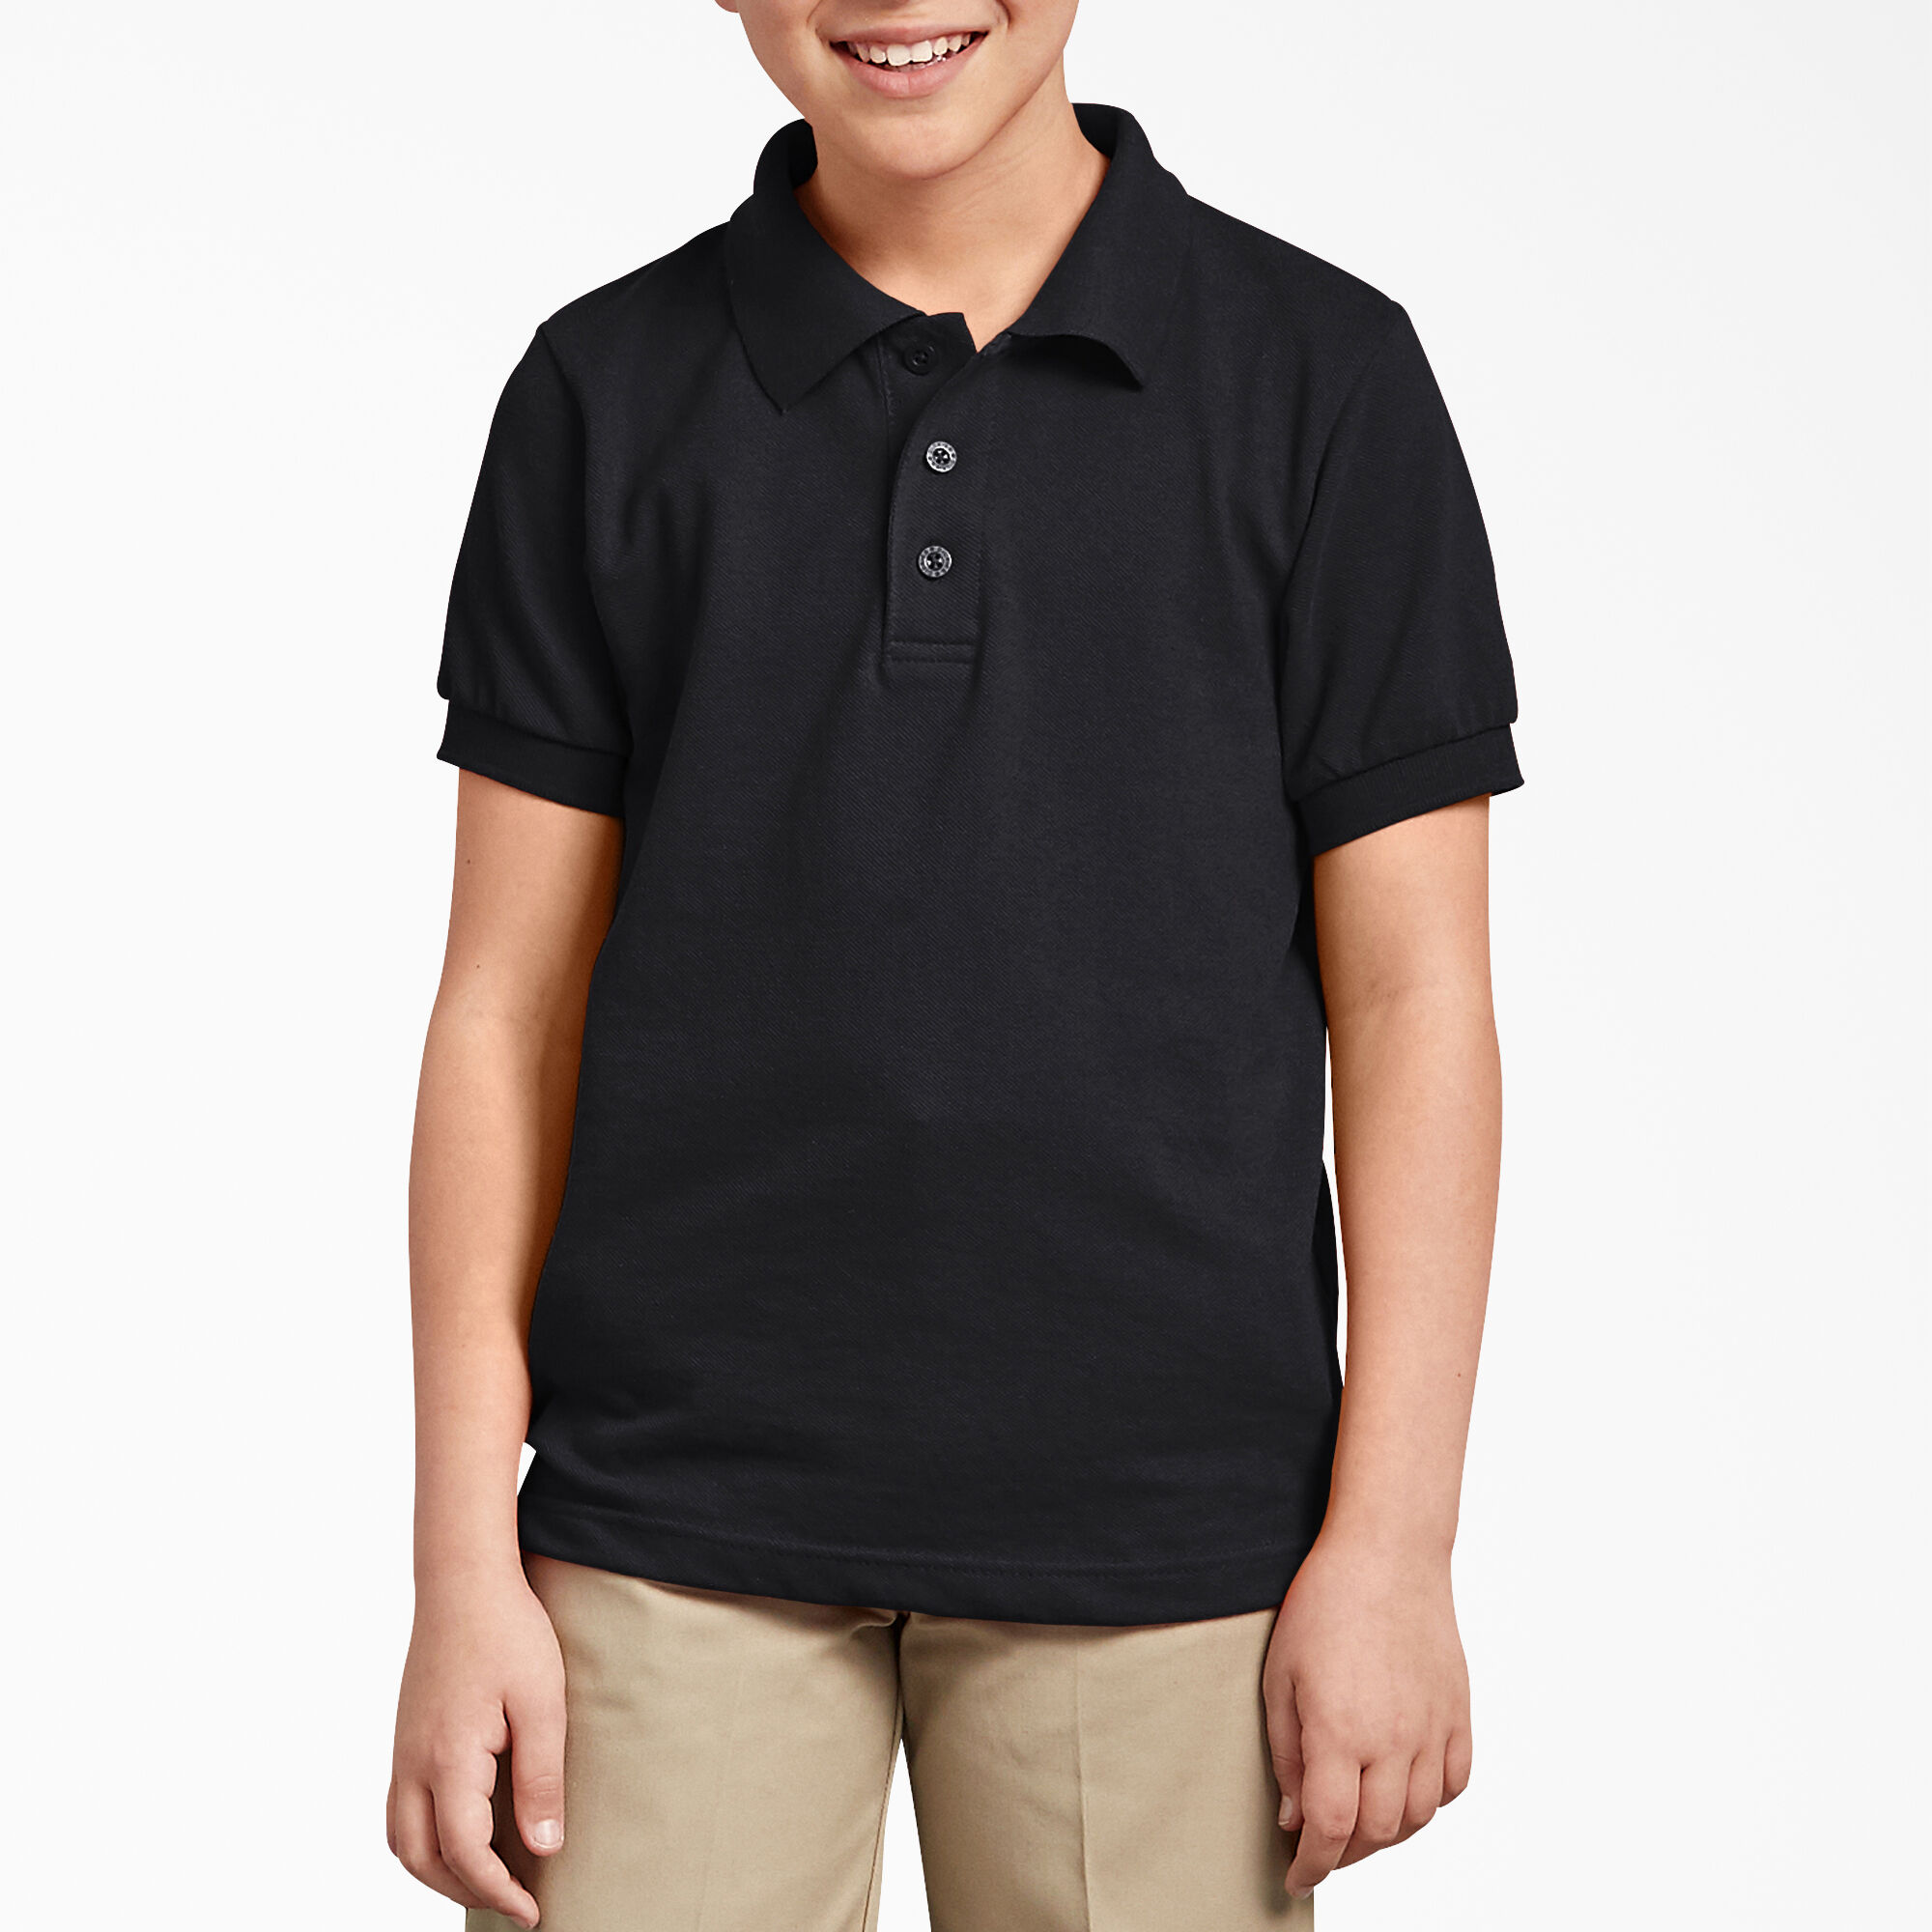 Ariat Ariat Unisex Youth 3.0 Team Polo Top Childs 